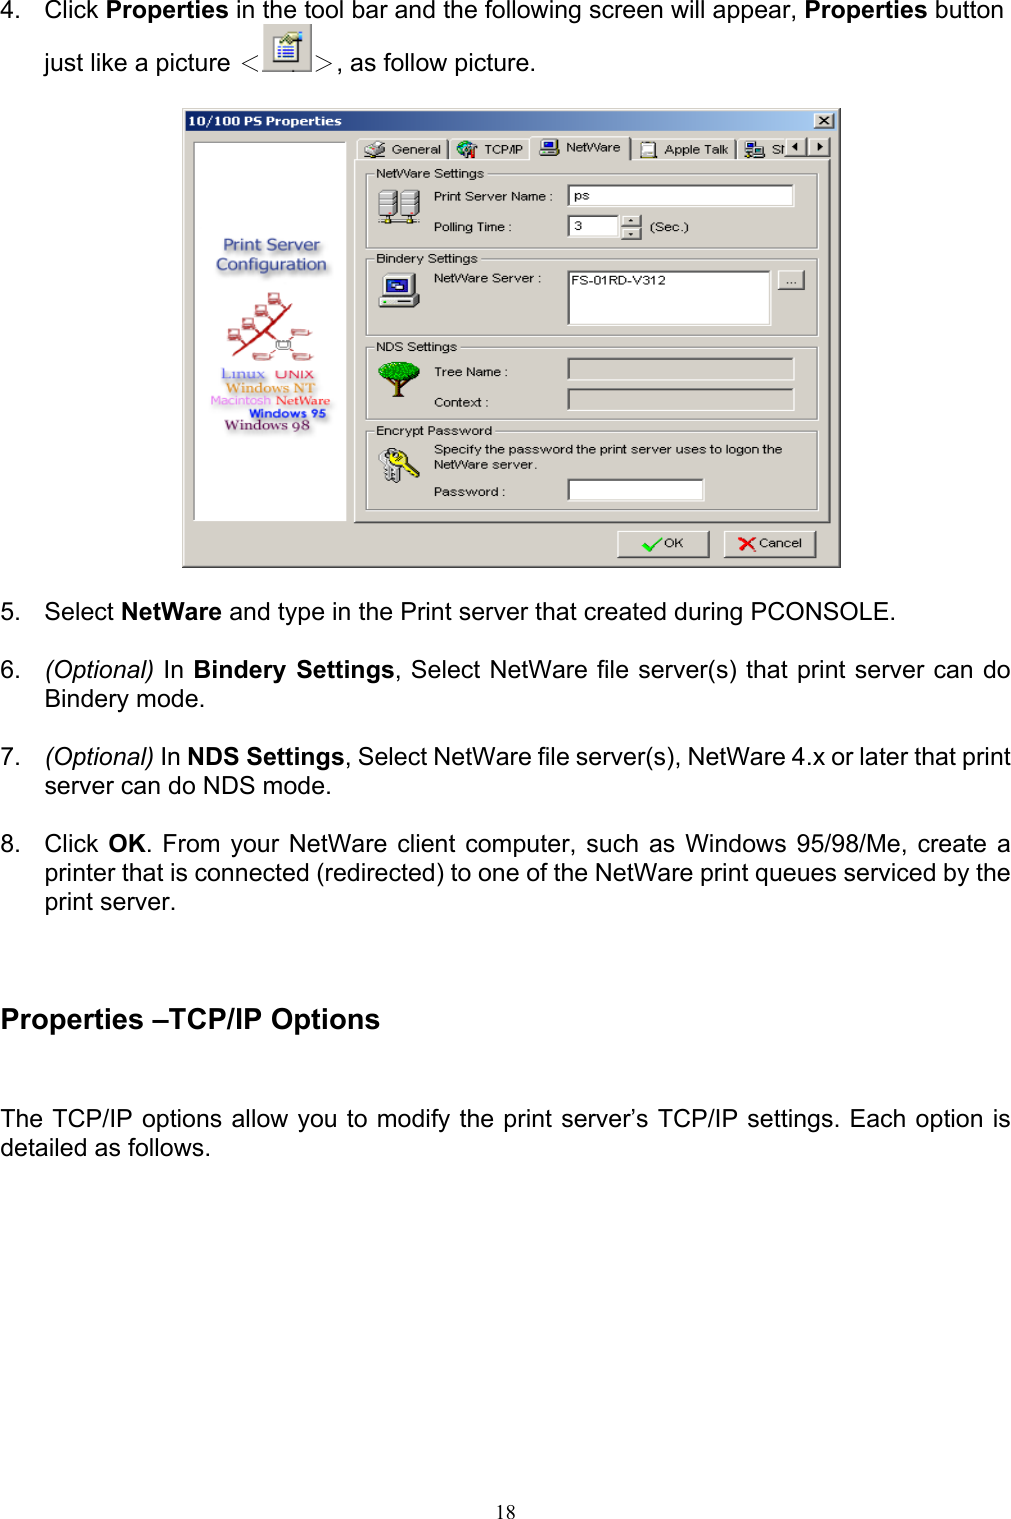   184. Click Properties in the tool bar and the following screen will appear, Properties button just like a picture ＜ ＞, as follow picture.    5. Select NetWare and type in the Print server that created during PCONSOLE.  6.  (Optional) In Bindery Settings, Select NetWare file server(s) that print server can do Bindery mode.  7.  (Optional) In NDS Settings, Select NetWare file server(s), NetWare 4.x or later that print server can do NDS mode.  8. Click OK. From your NetWare client computer, such as Windows 95/98/Me, create a printer that is connected (redirected) to one of the NetWare print queues serviced by the print server.    Properties –TCP/IP Options The TCP/IP options allow you to modify the print server’s TCP/IP settings. Each option is detailed as follows. 